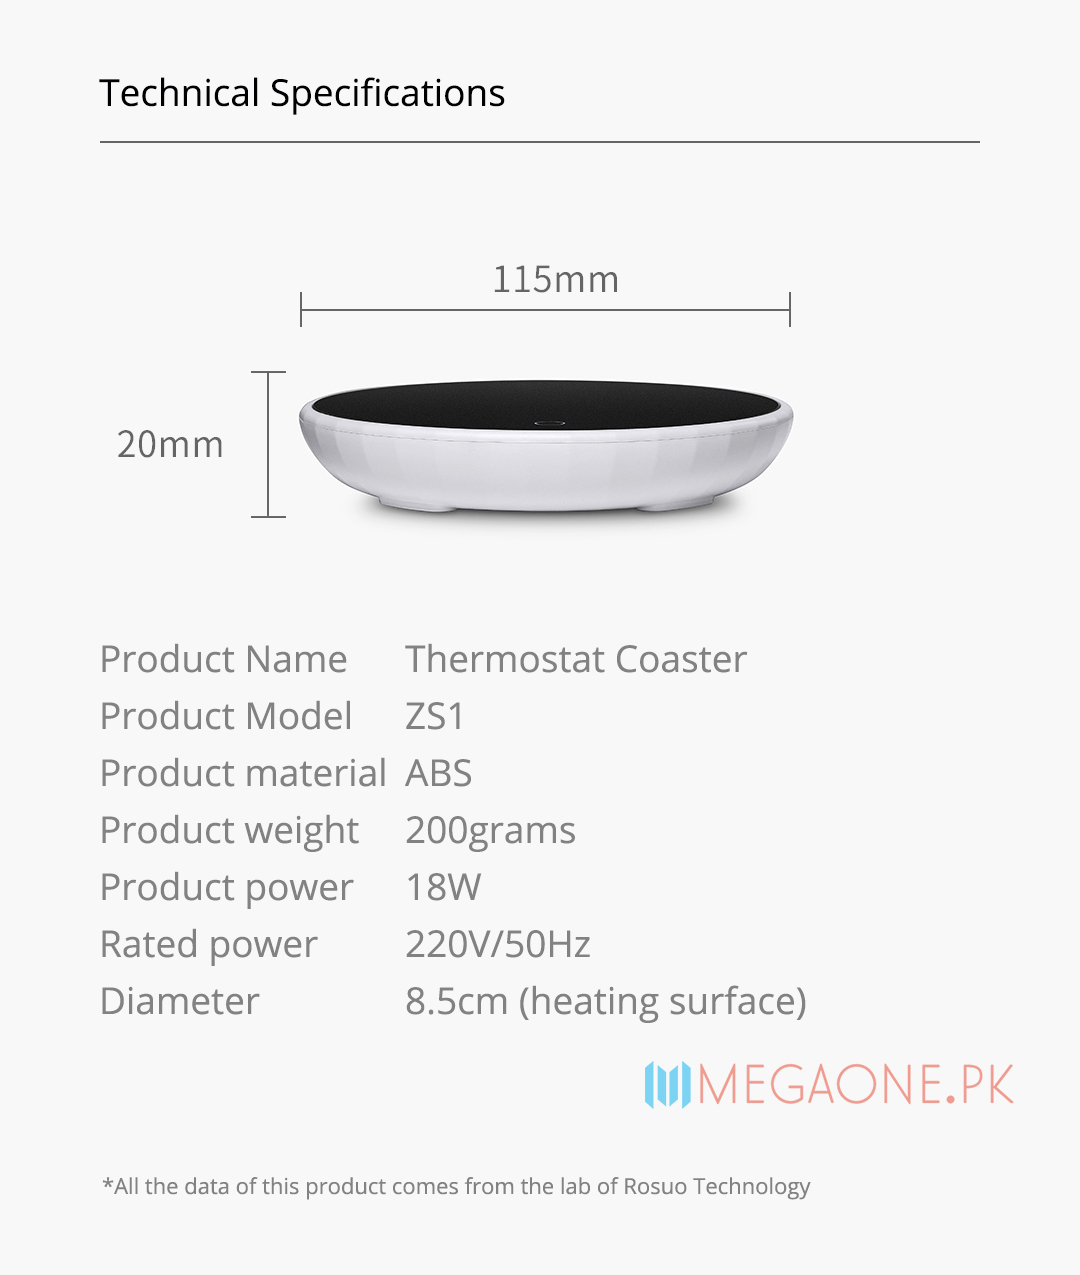 Thermostat Coaster ZS1 ABS 200grams 18W 220V/50Hz 8.5cm (heating surface)